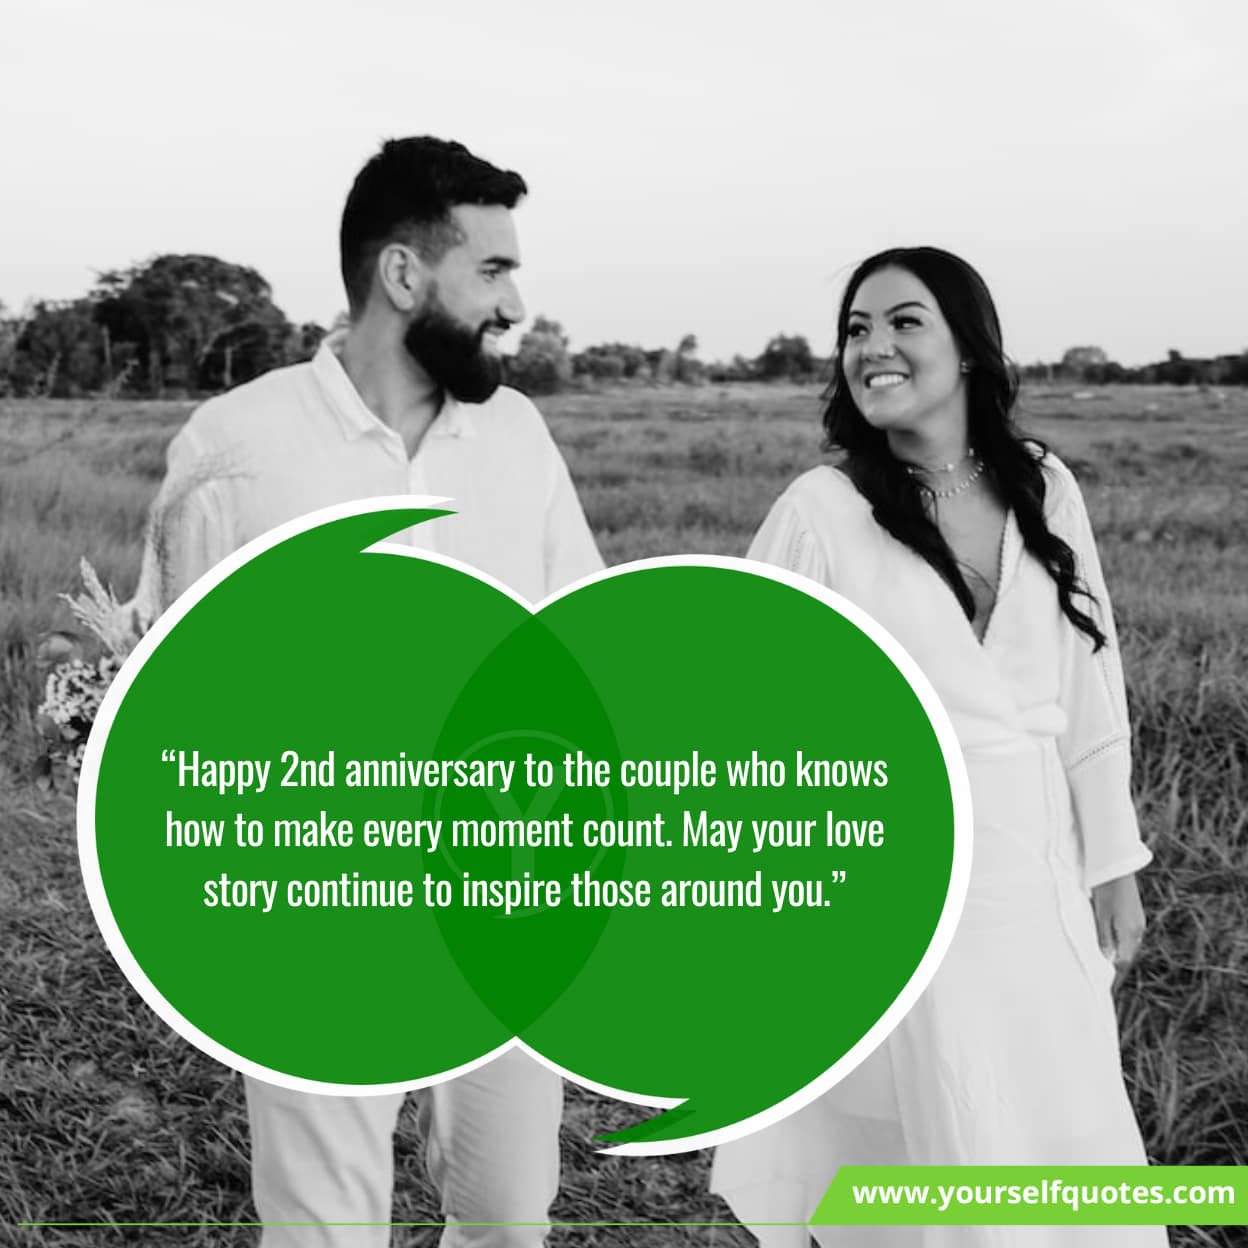 Sending Love and Anniversary Wishes on Your 2nd Year